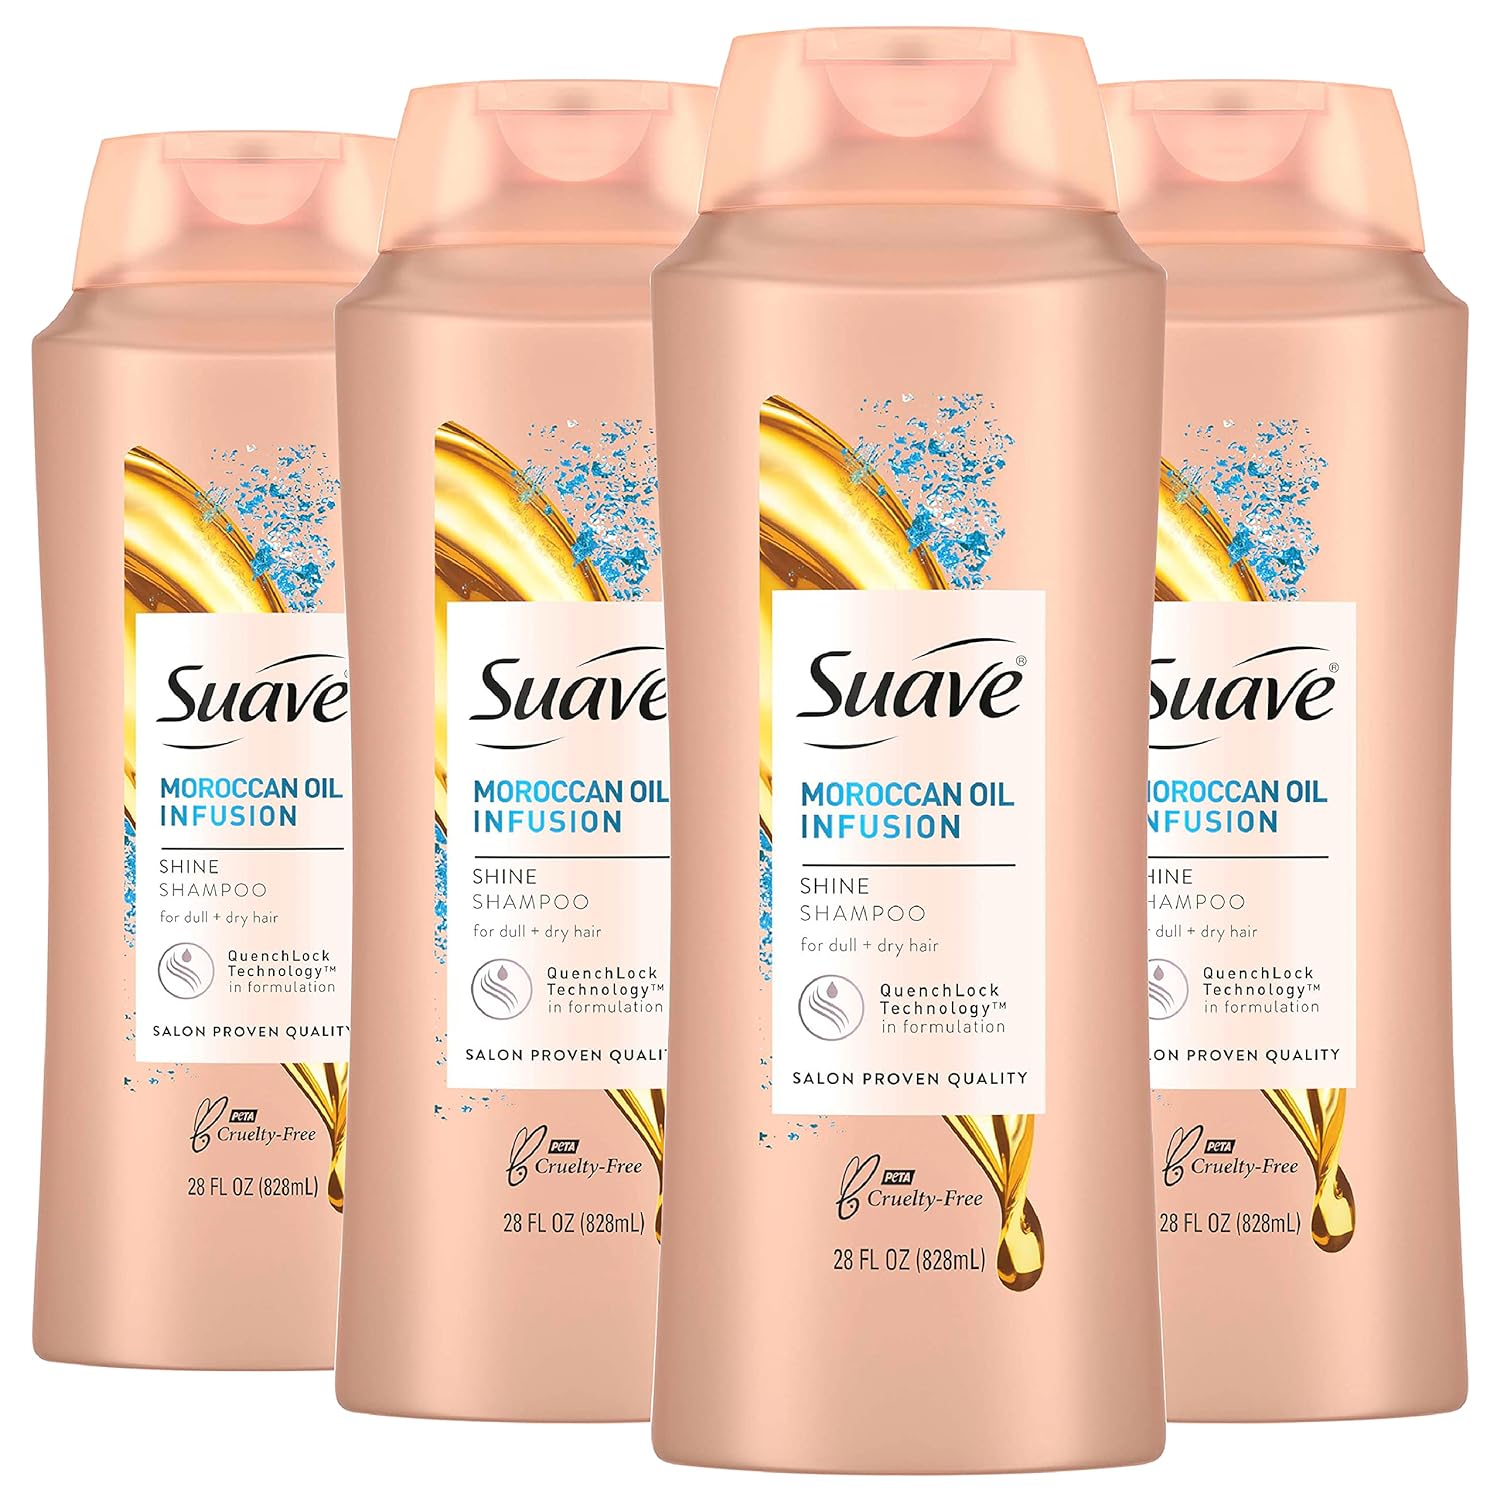 Missing Your Fave Shampoo. 5 Ways To Find A Dupe For Suave